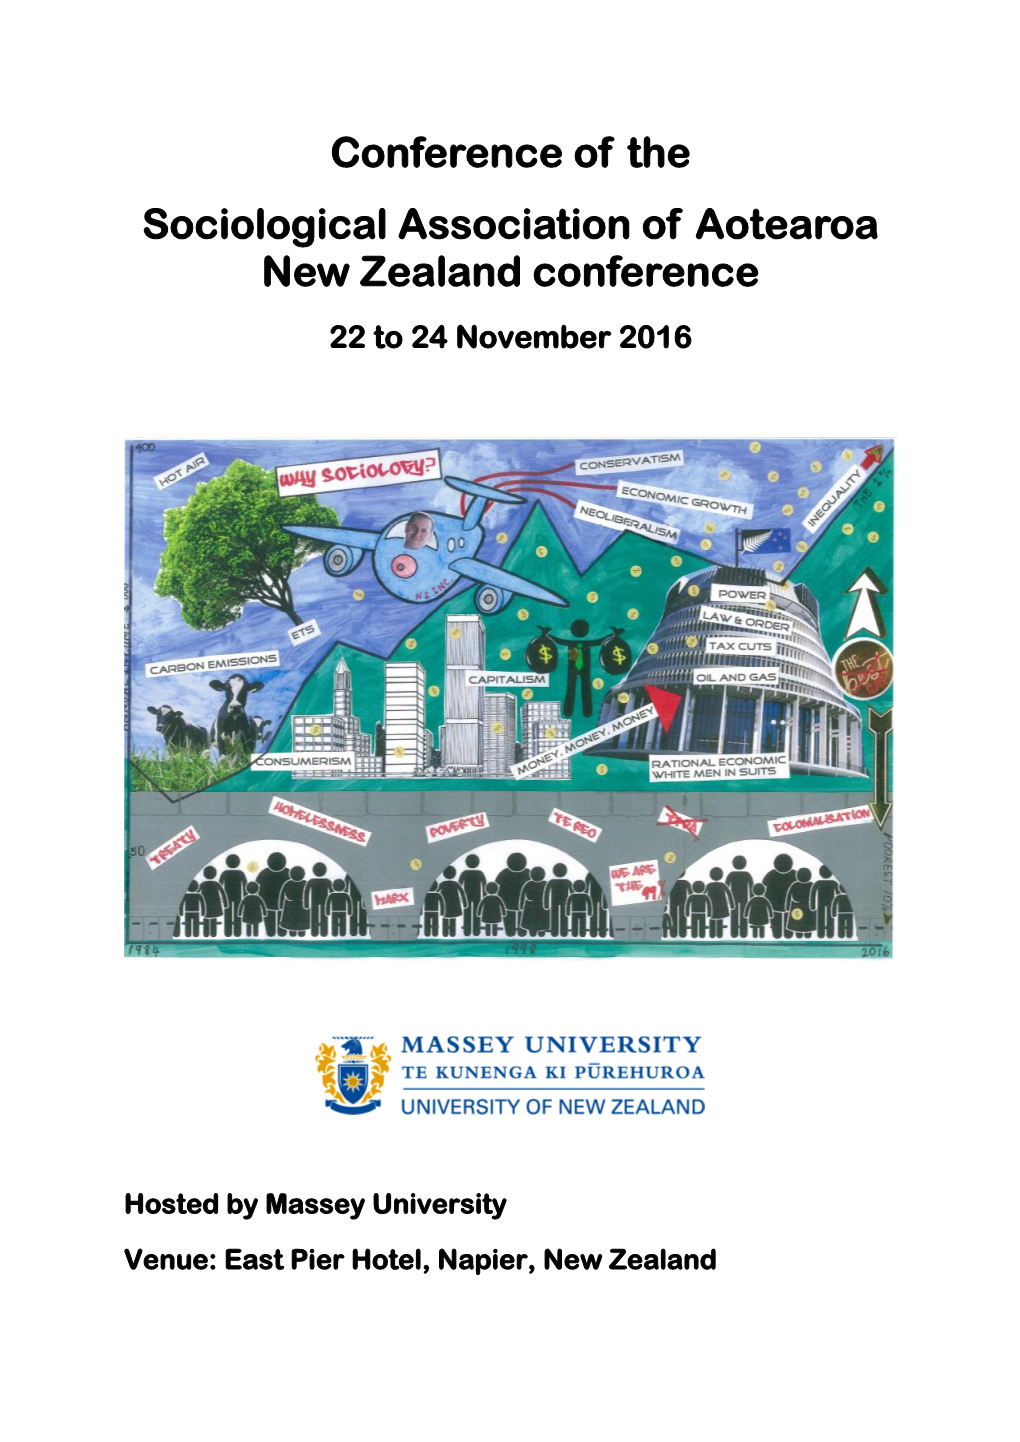 SAANZ-Conference-Booklet-2016.Pdf